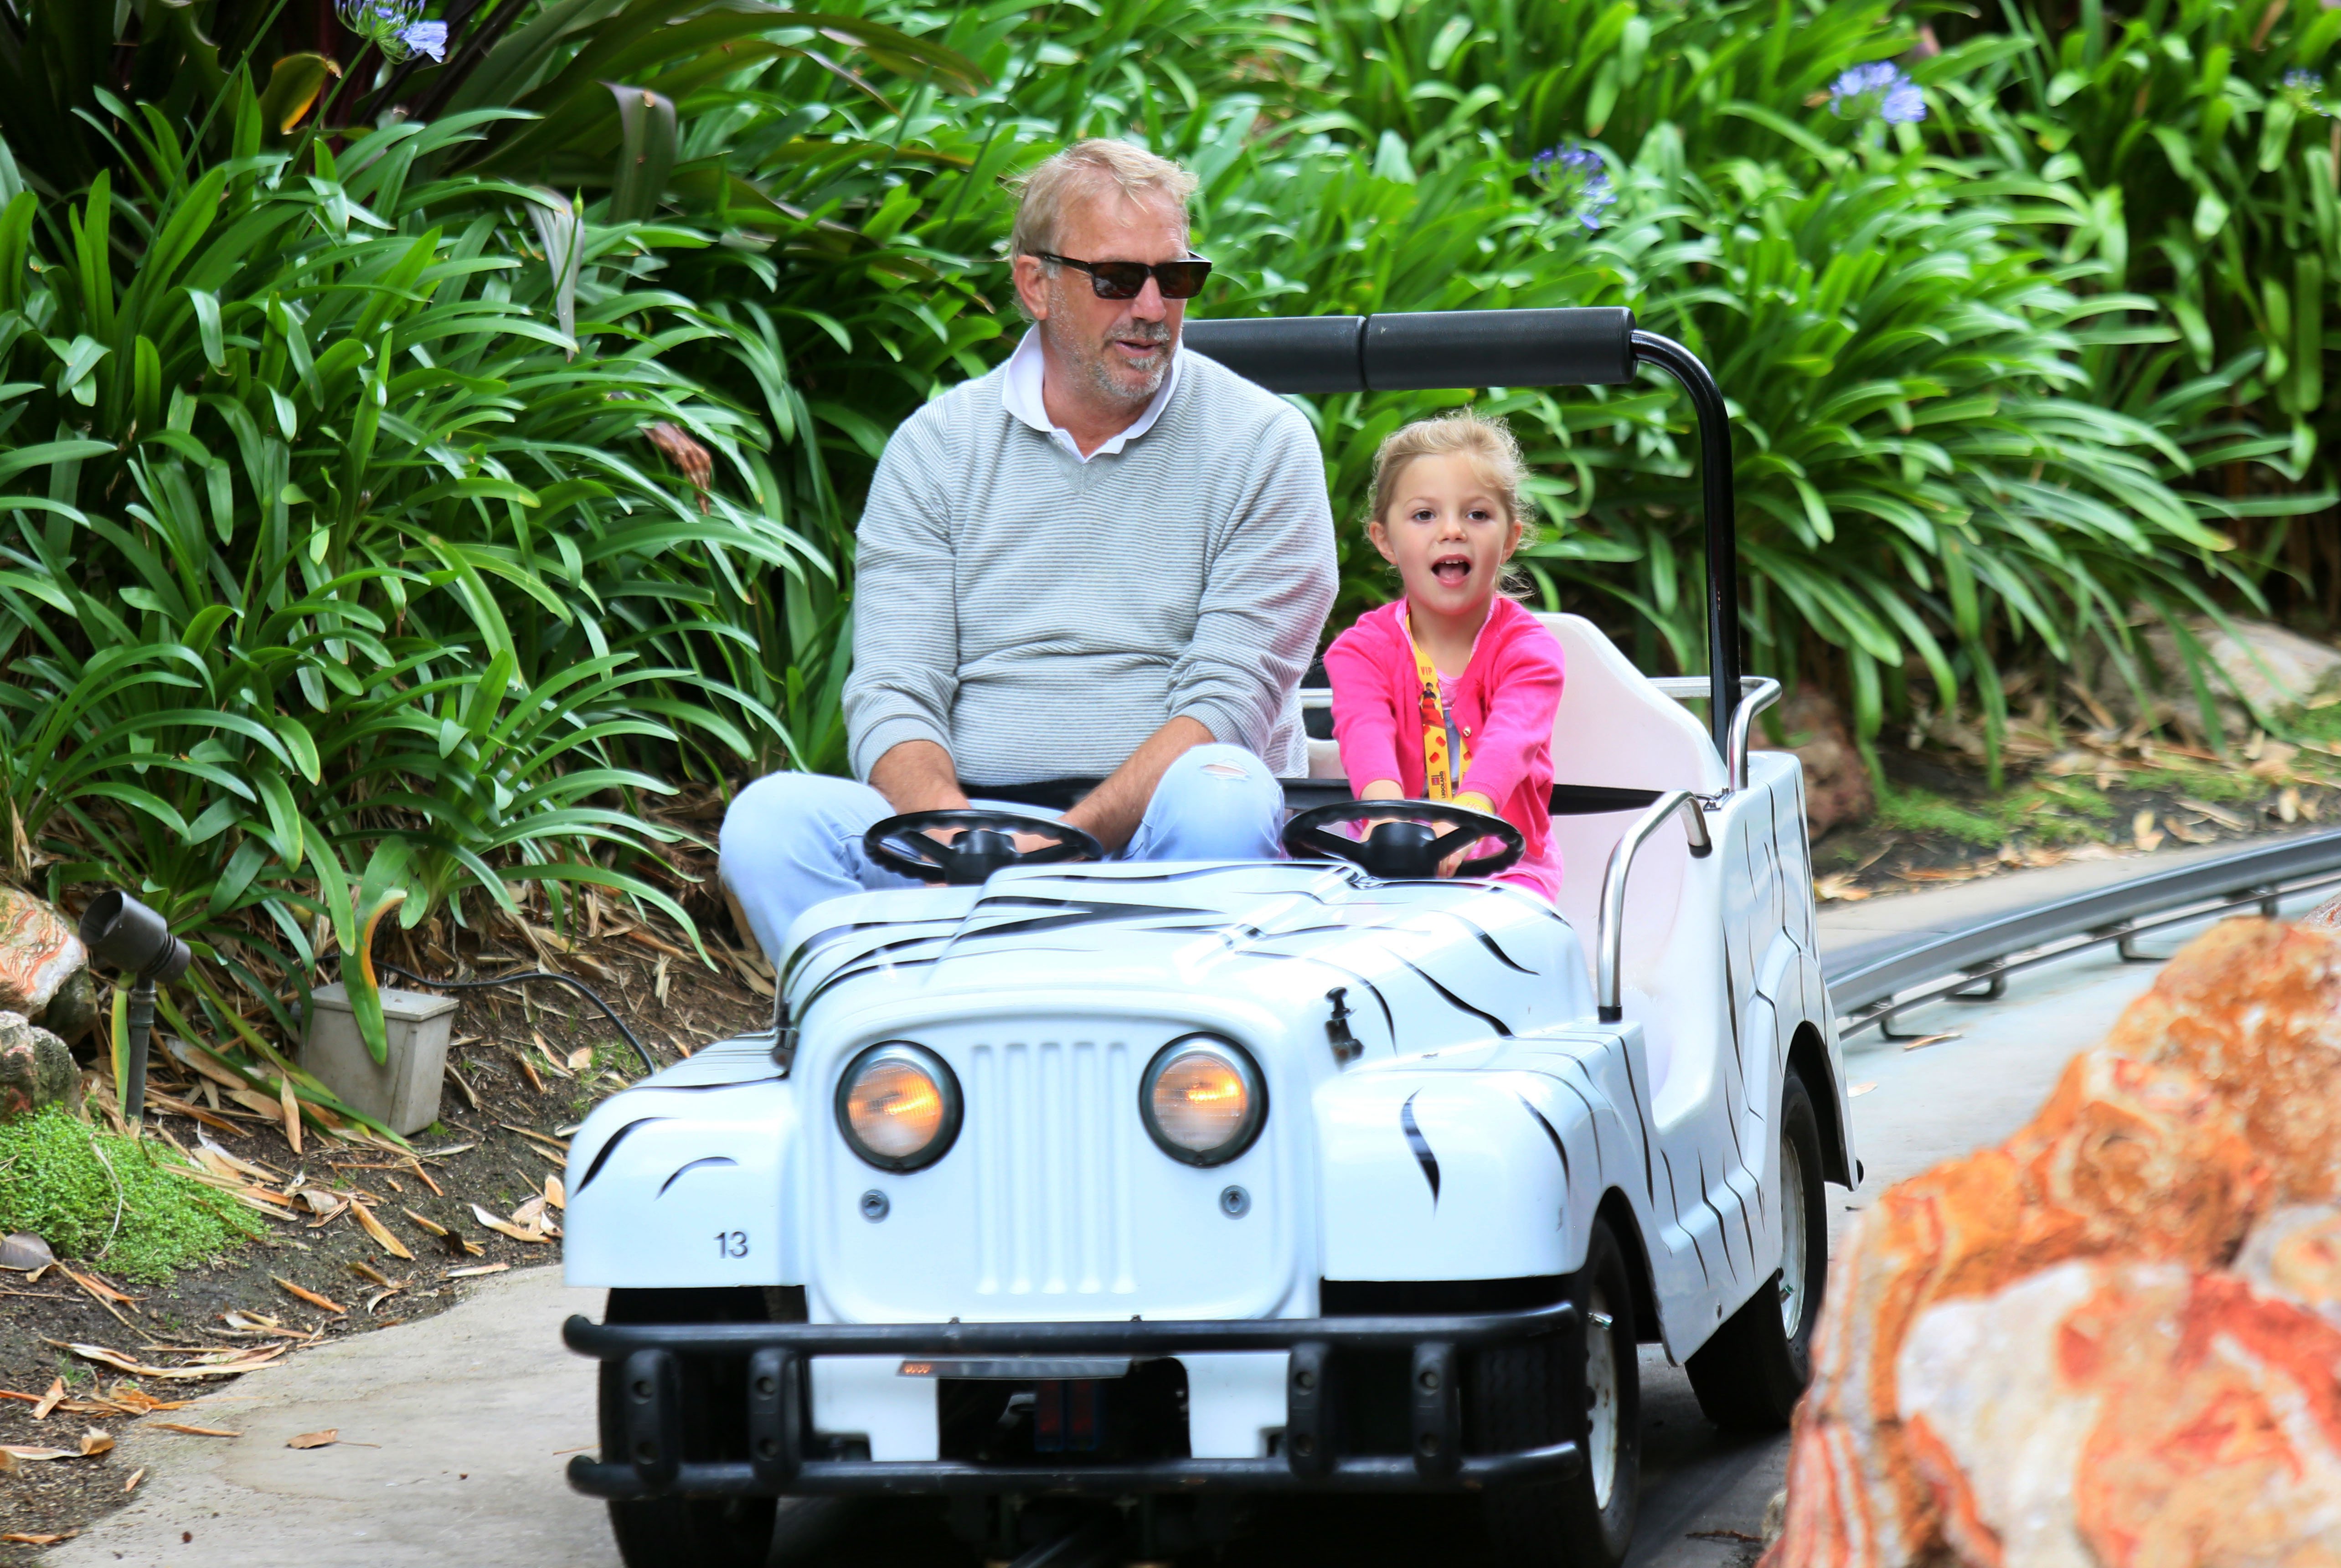 Kevin Costner on a ride with his daughter Grace at Legoland California on Wedensday, May 27, 2015 in Calsbad, CA | Source: Getty Images 